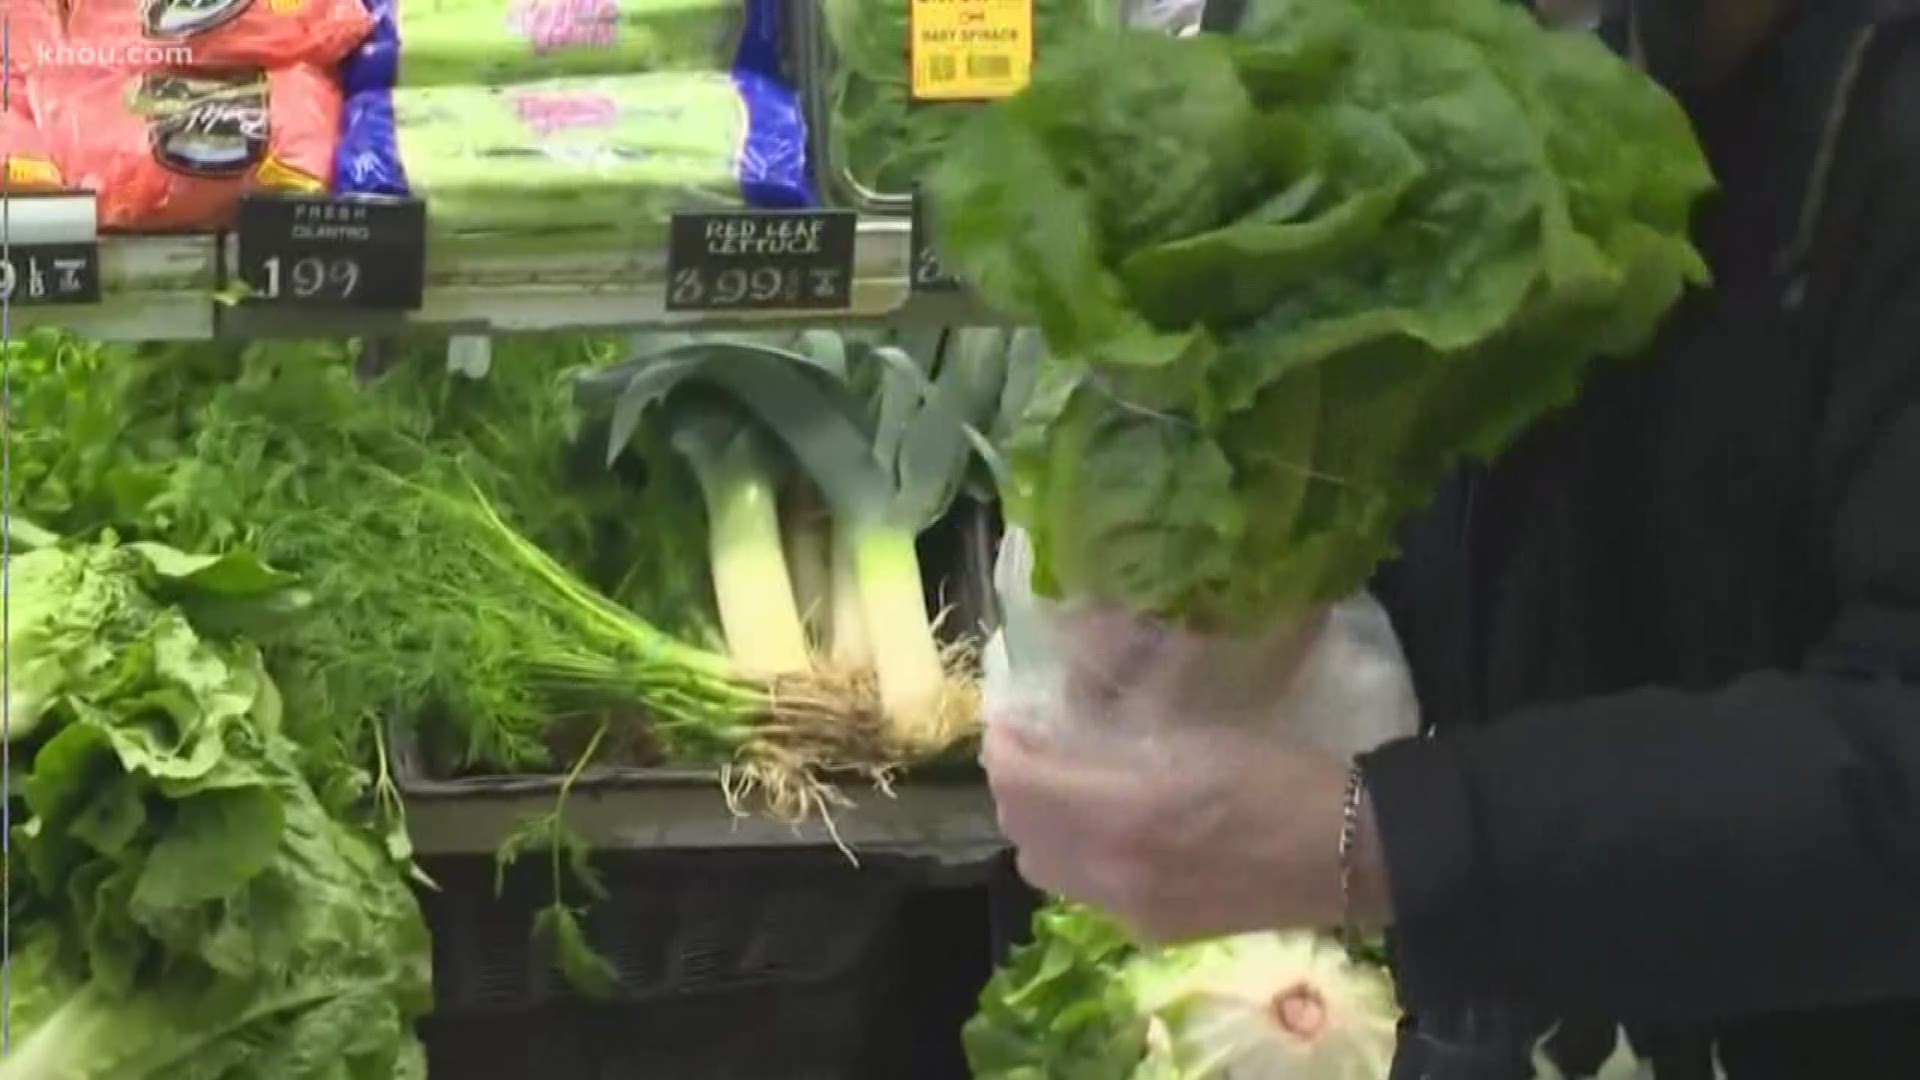 KHOU 11 Top Headlines at 10 p.m. two priests in Cardinal DiNardo's archdiocese in Houston face abuse allegations, CDC is telling everyone to throw away their romaine lettuce because of an E-coli outbreak and two workers at a massage parlor in the Richmond